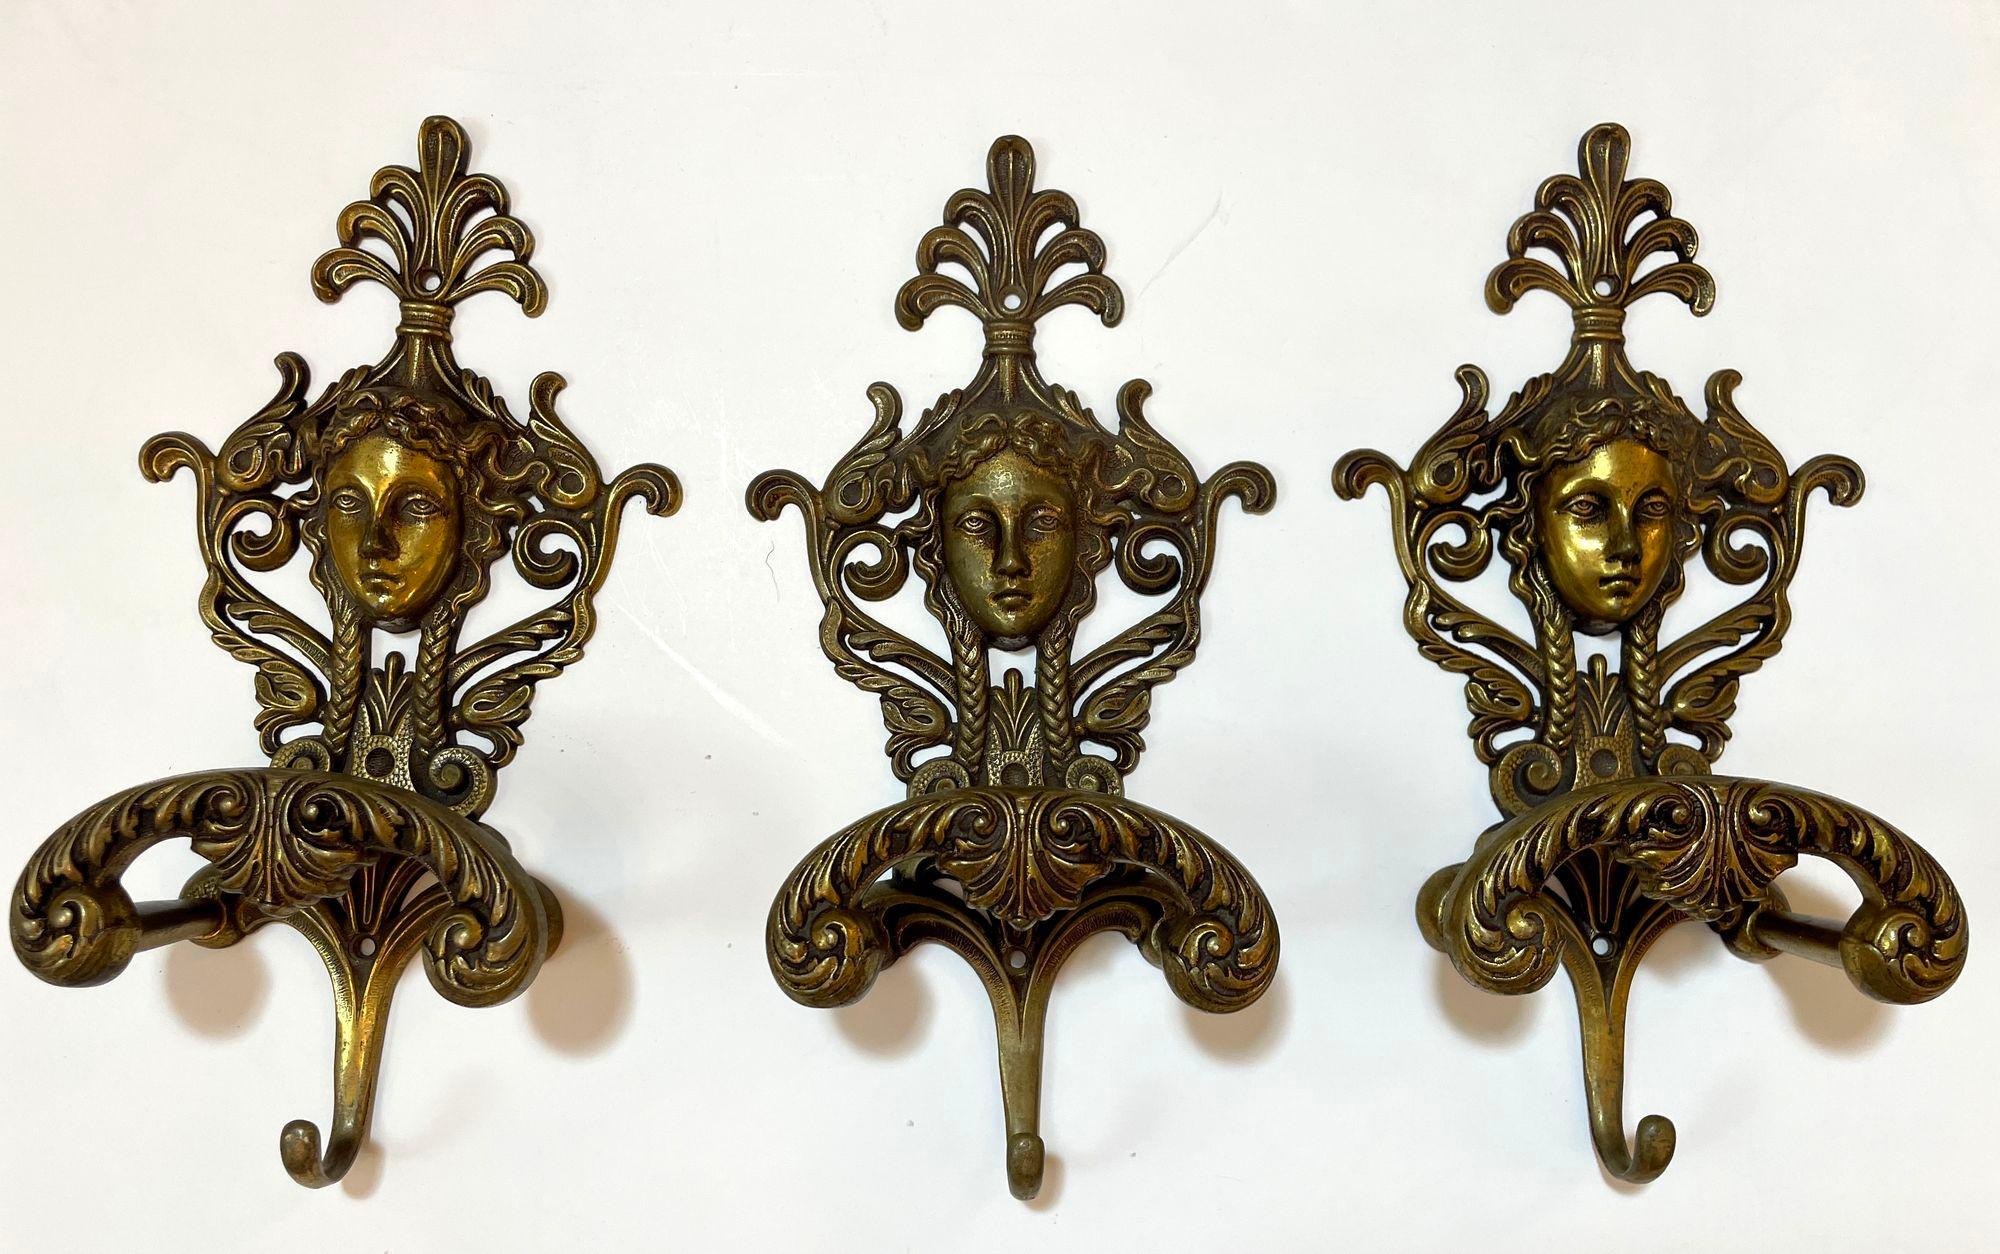 Antique Ornate Italian Figural Architectural Cast Brass Wall Hook Decor Set of 3 For Sale 10